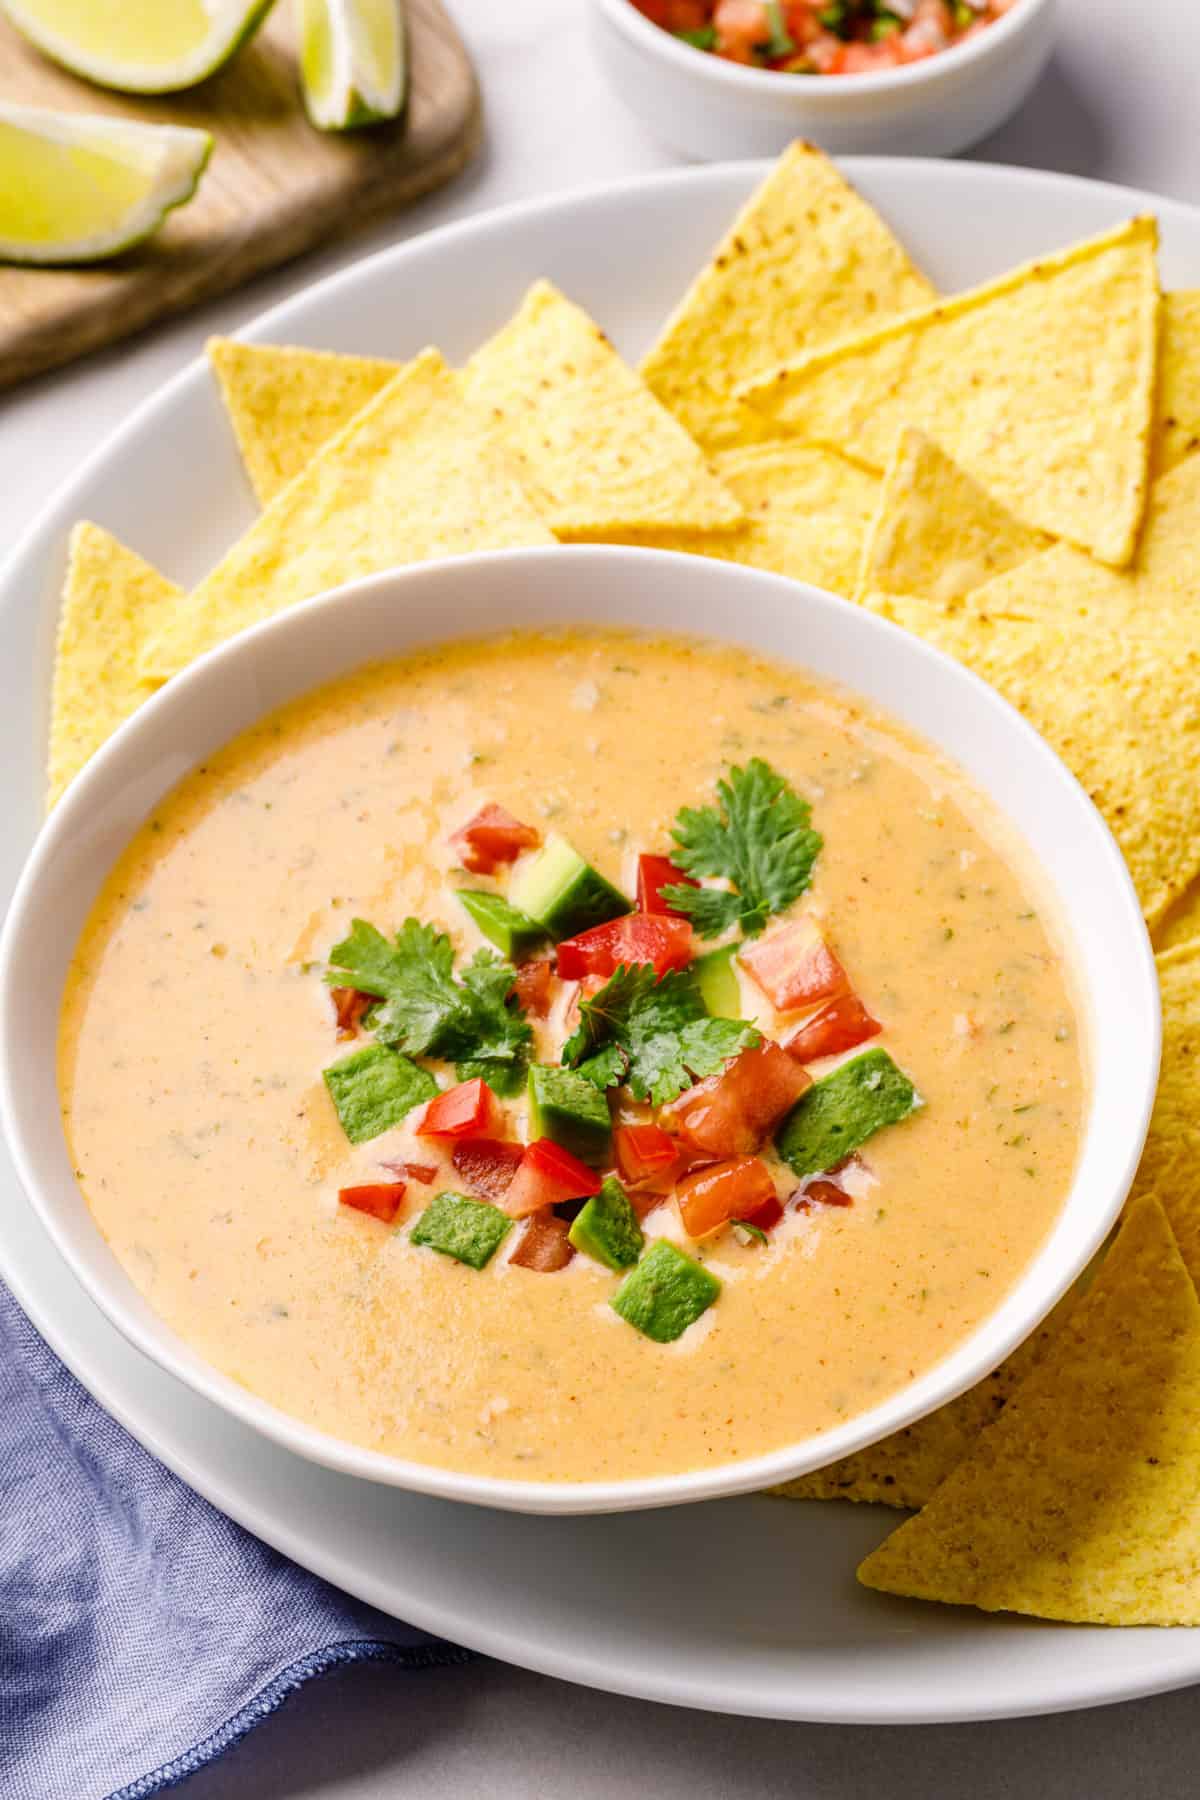 homemade queso dip served in a white bowl with a side of tortilla chips